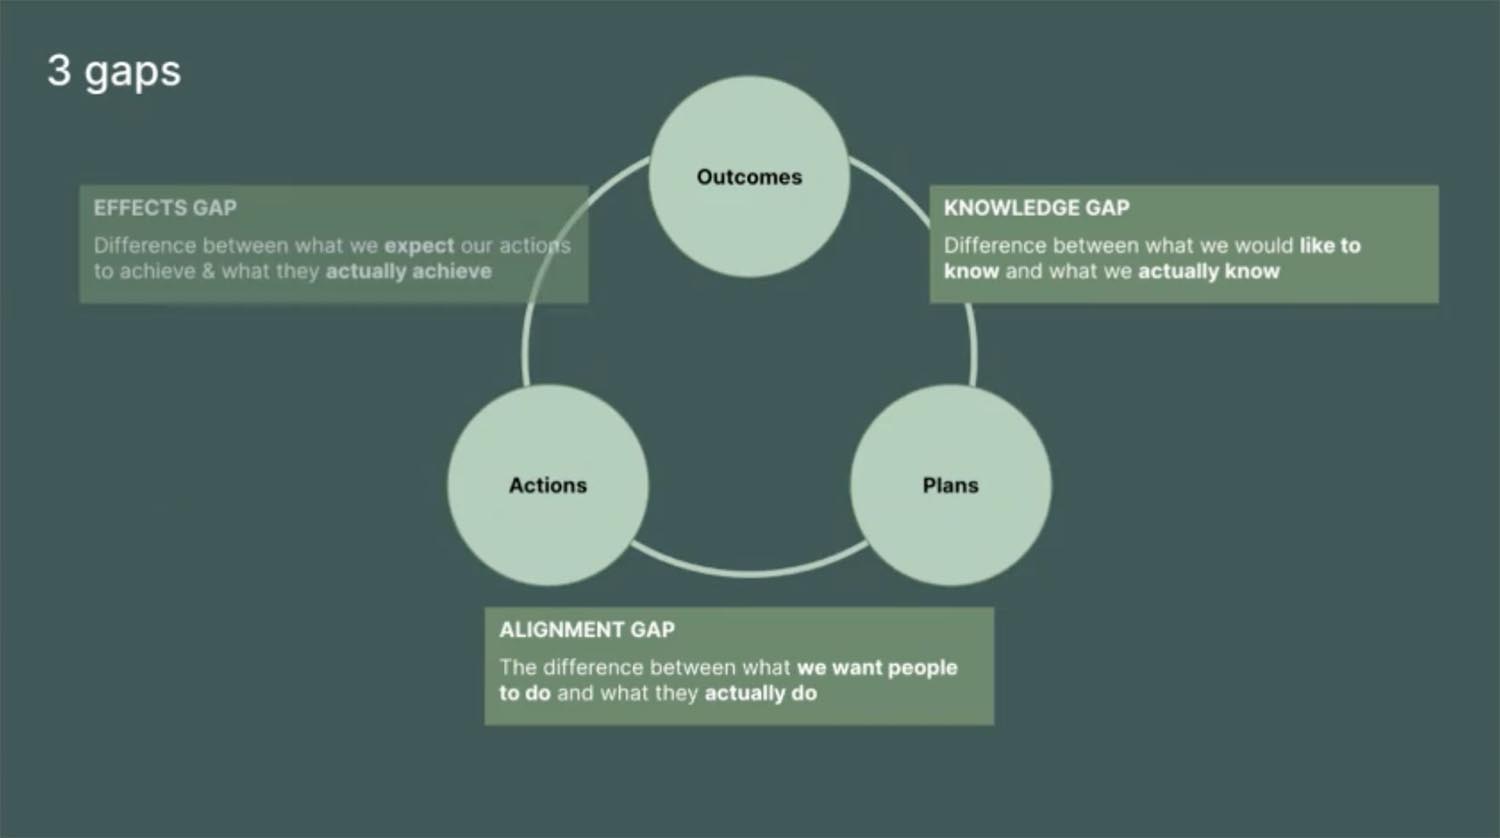 To close the alignment gap, we focus on three things and how they are connected to each other.